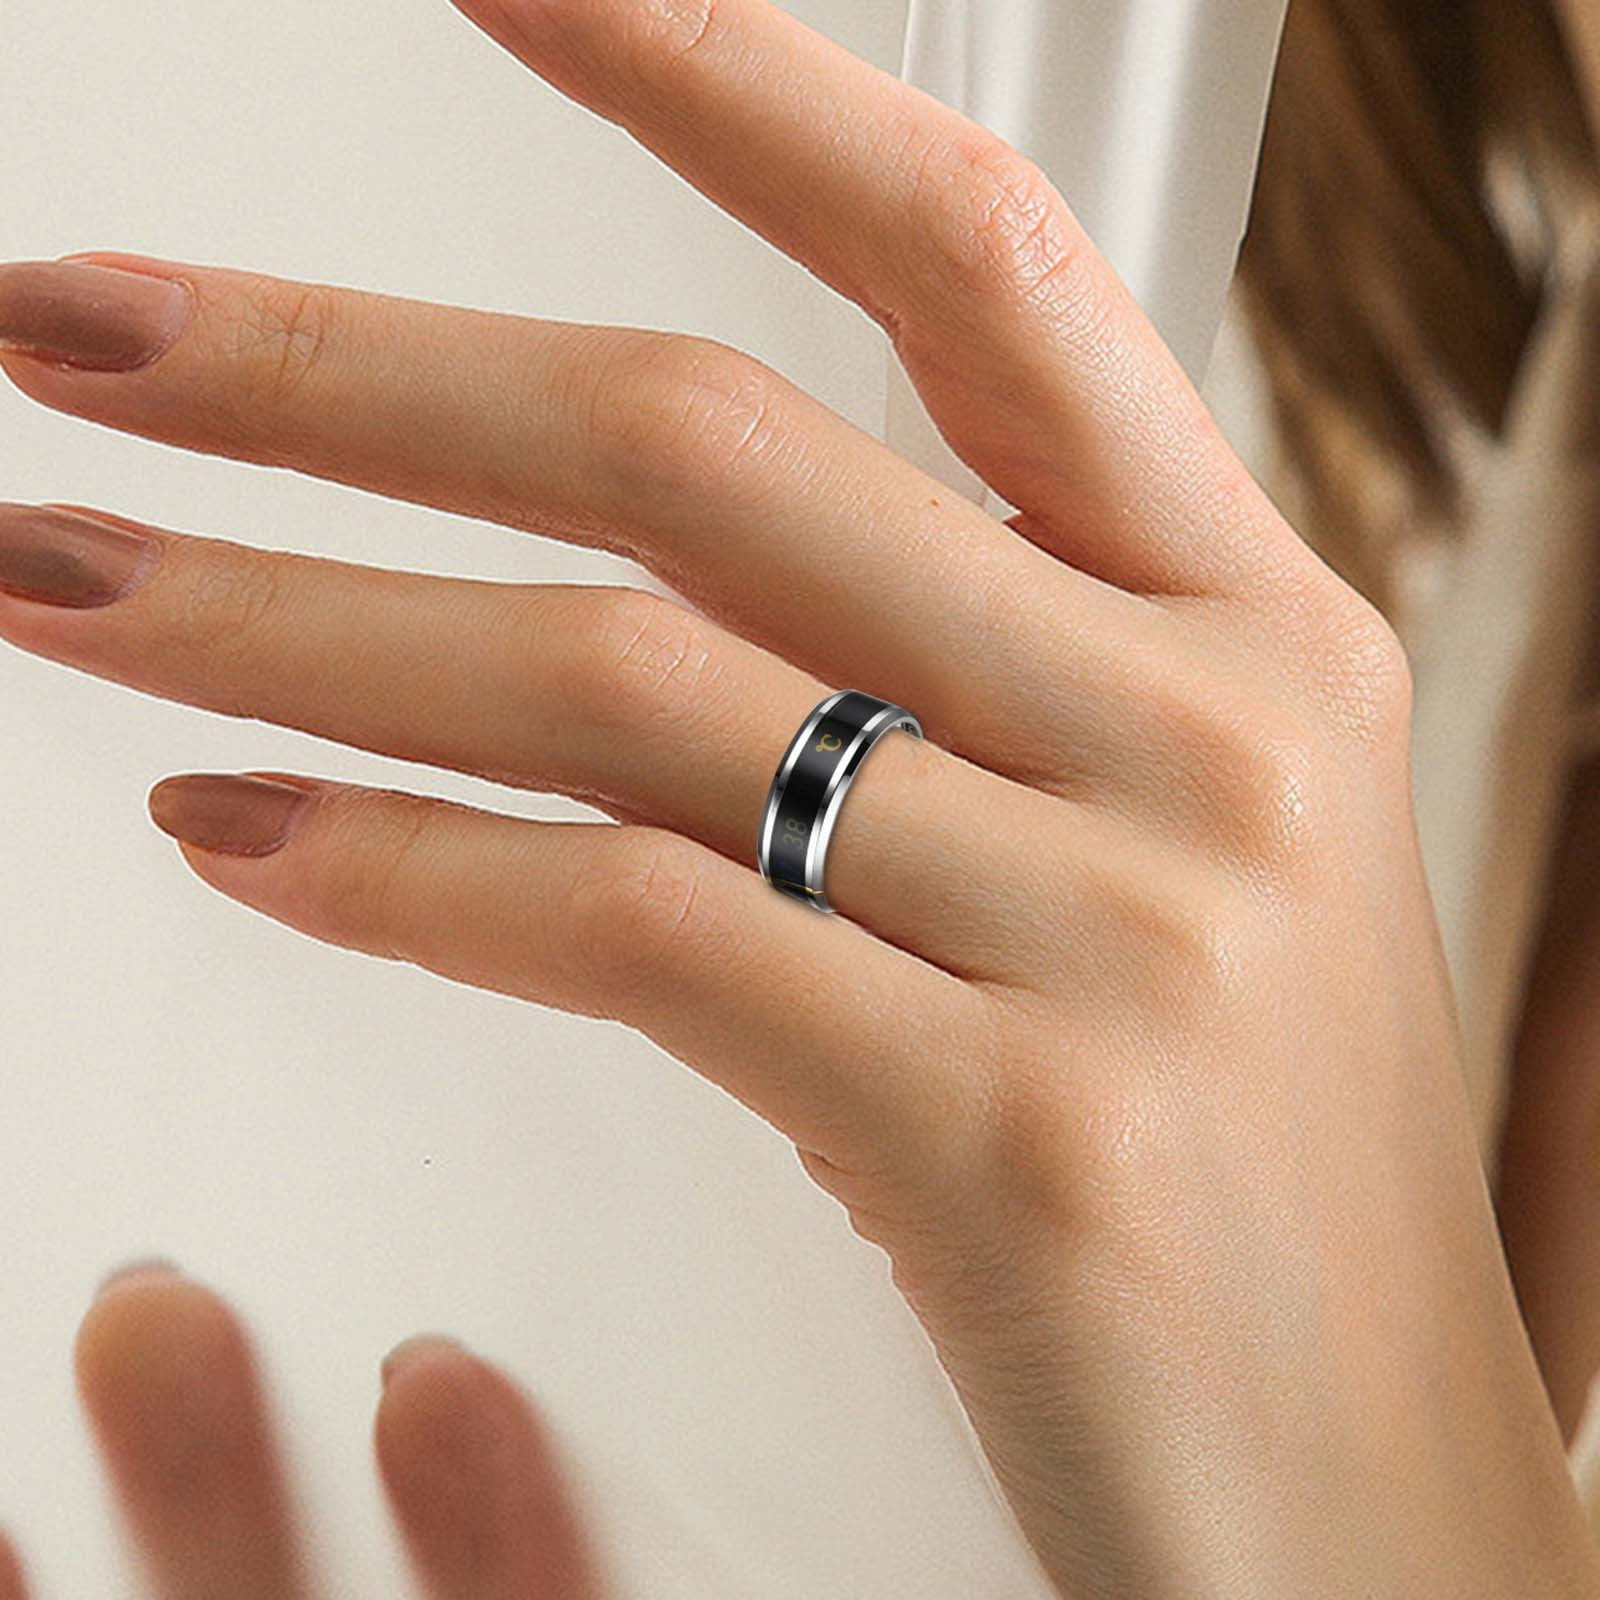 Married to money: 'smart' wedding ring doubles as payment method | Wearable  technology | The Guardian